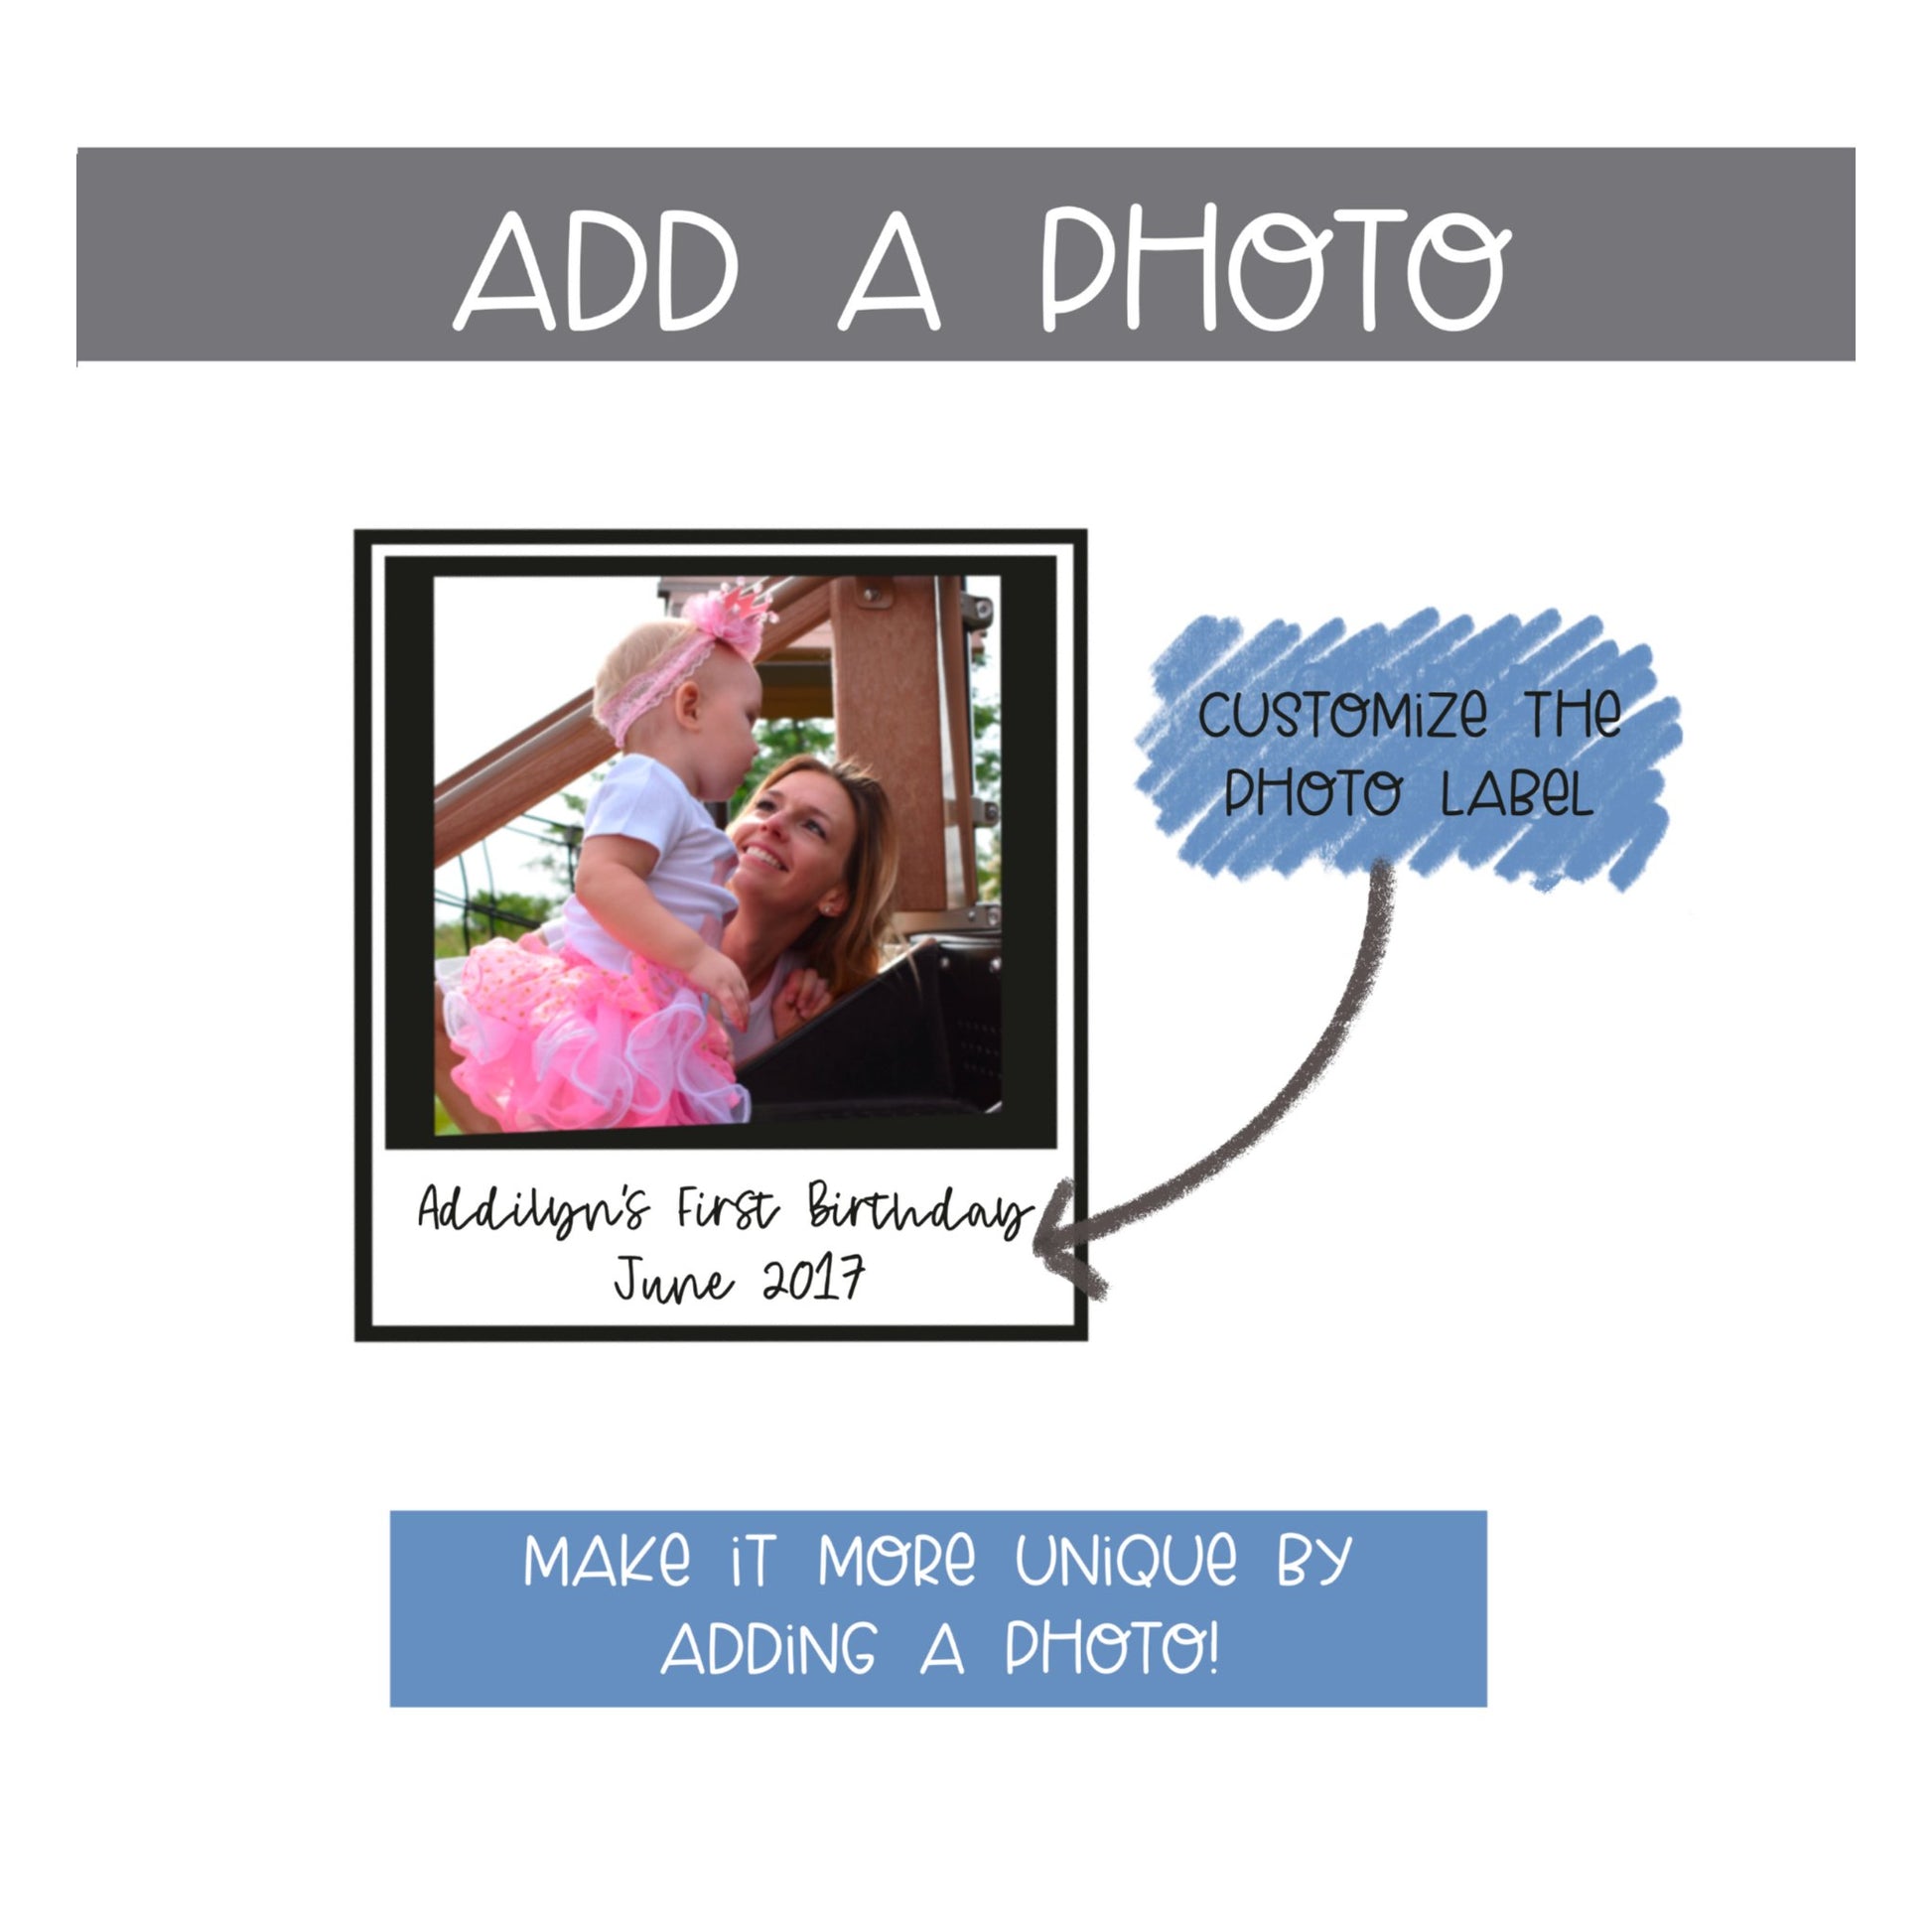 gift certificate example of add a photo, example of the photo space and label section of the self-published personalized gift- a children’s picture book called “I’m Your Mommy”